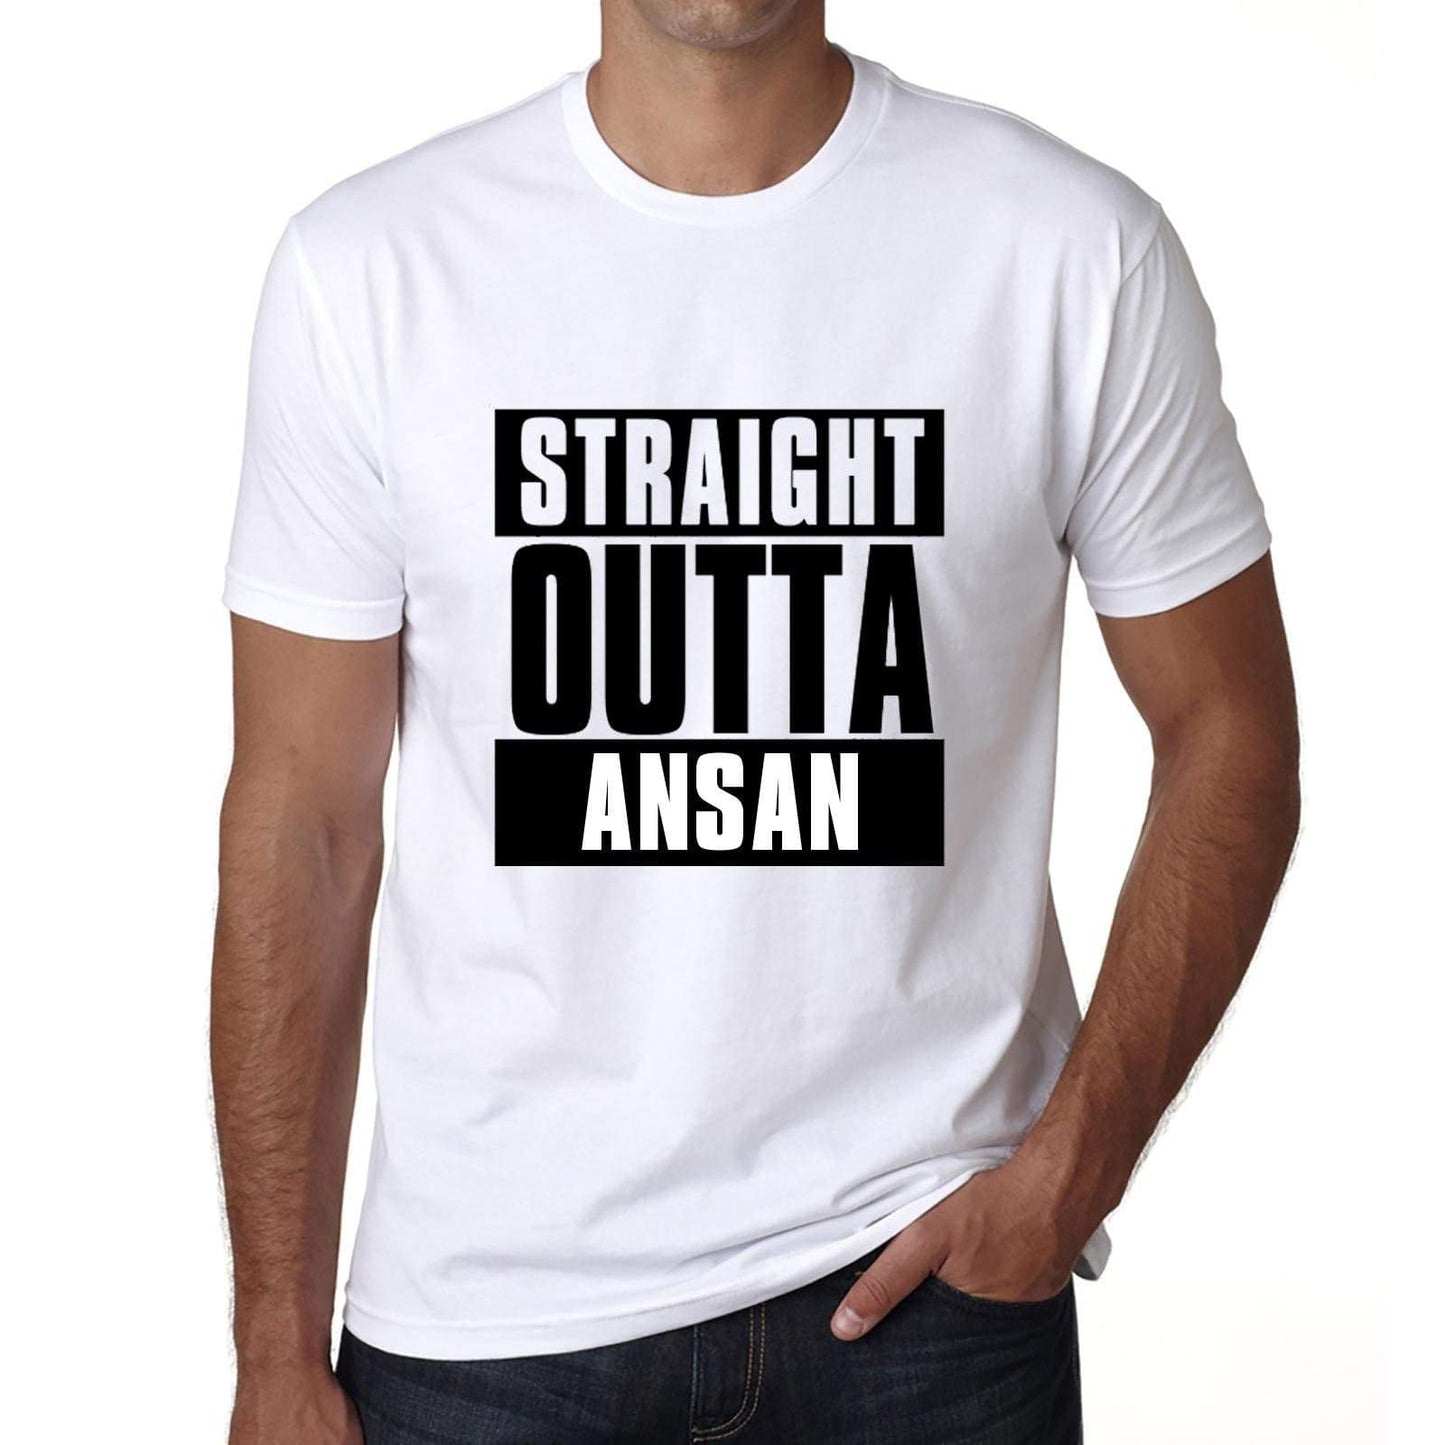 Straight Outta Ansan Mens Short Sleeve Round Neck T-Shirt 00027 - White / S - Casual